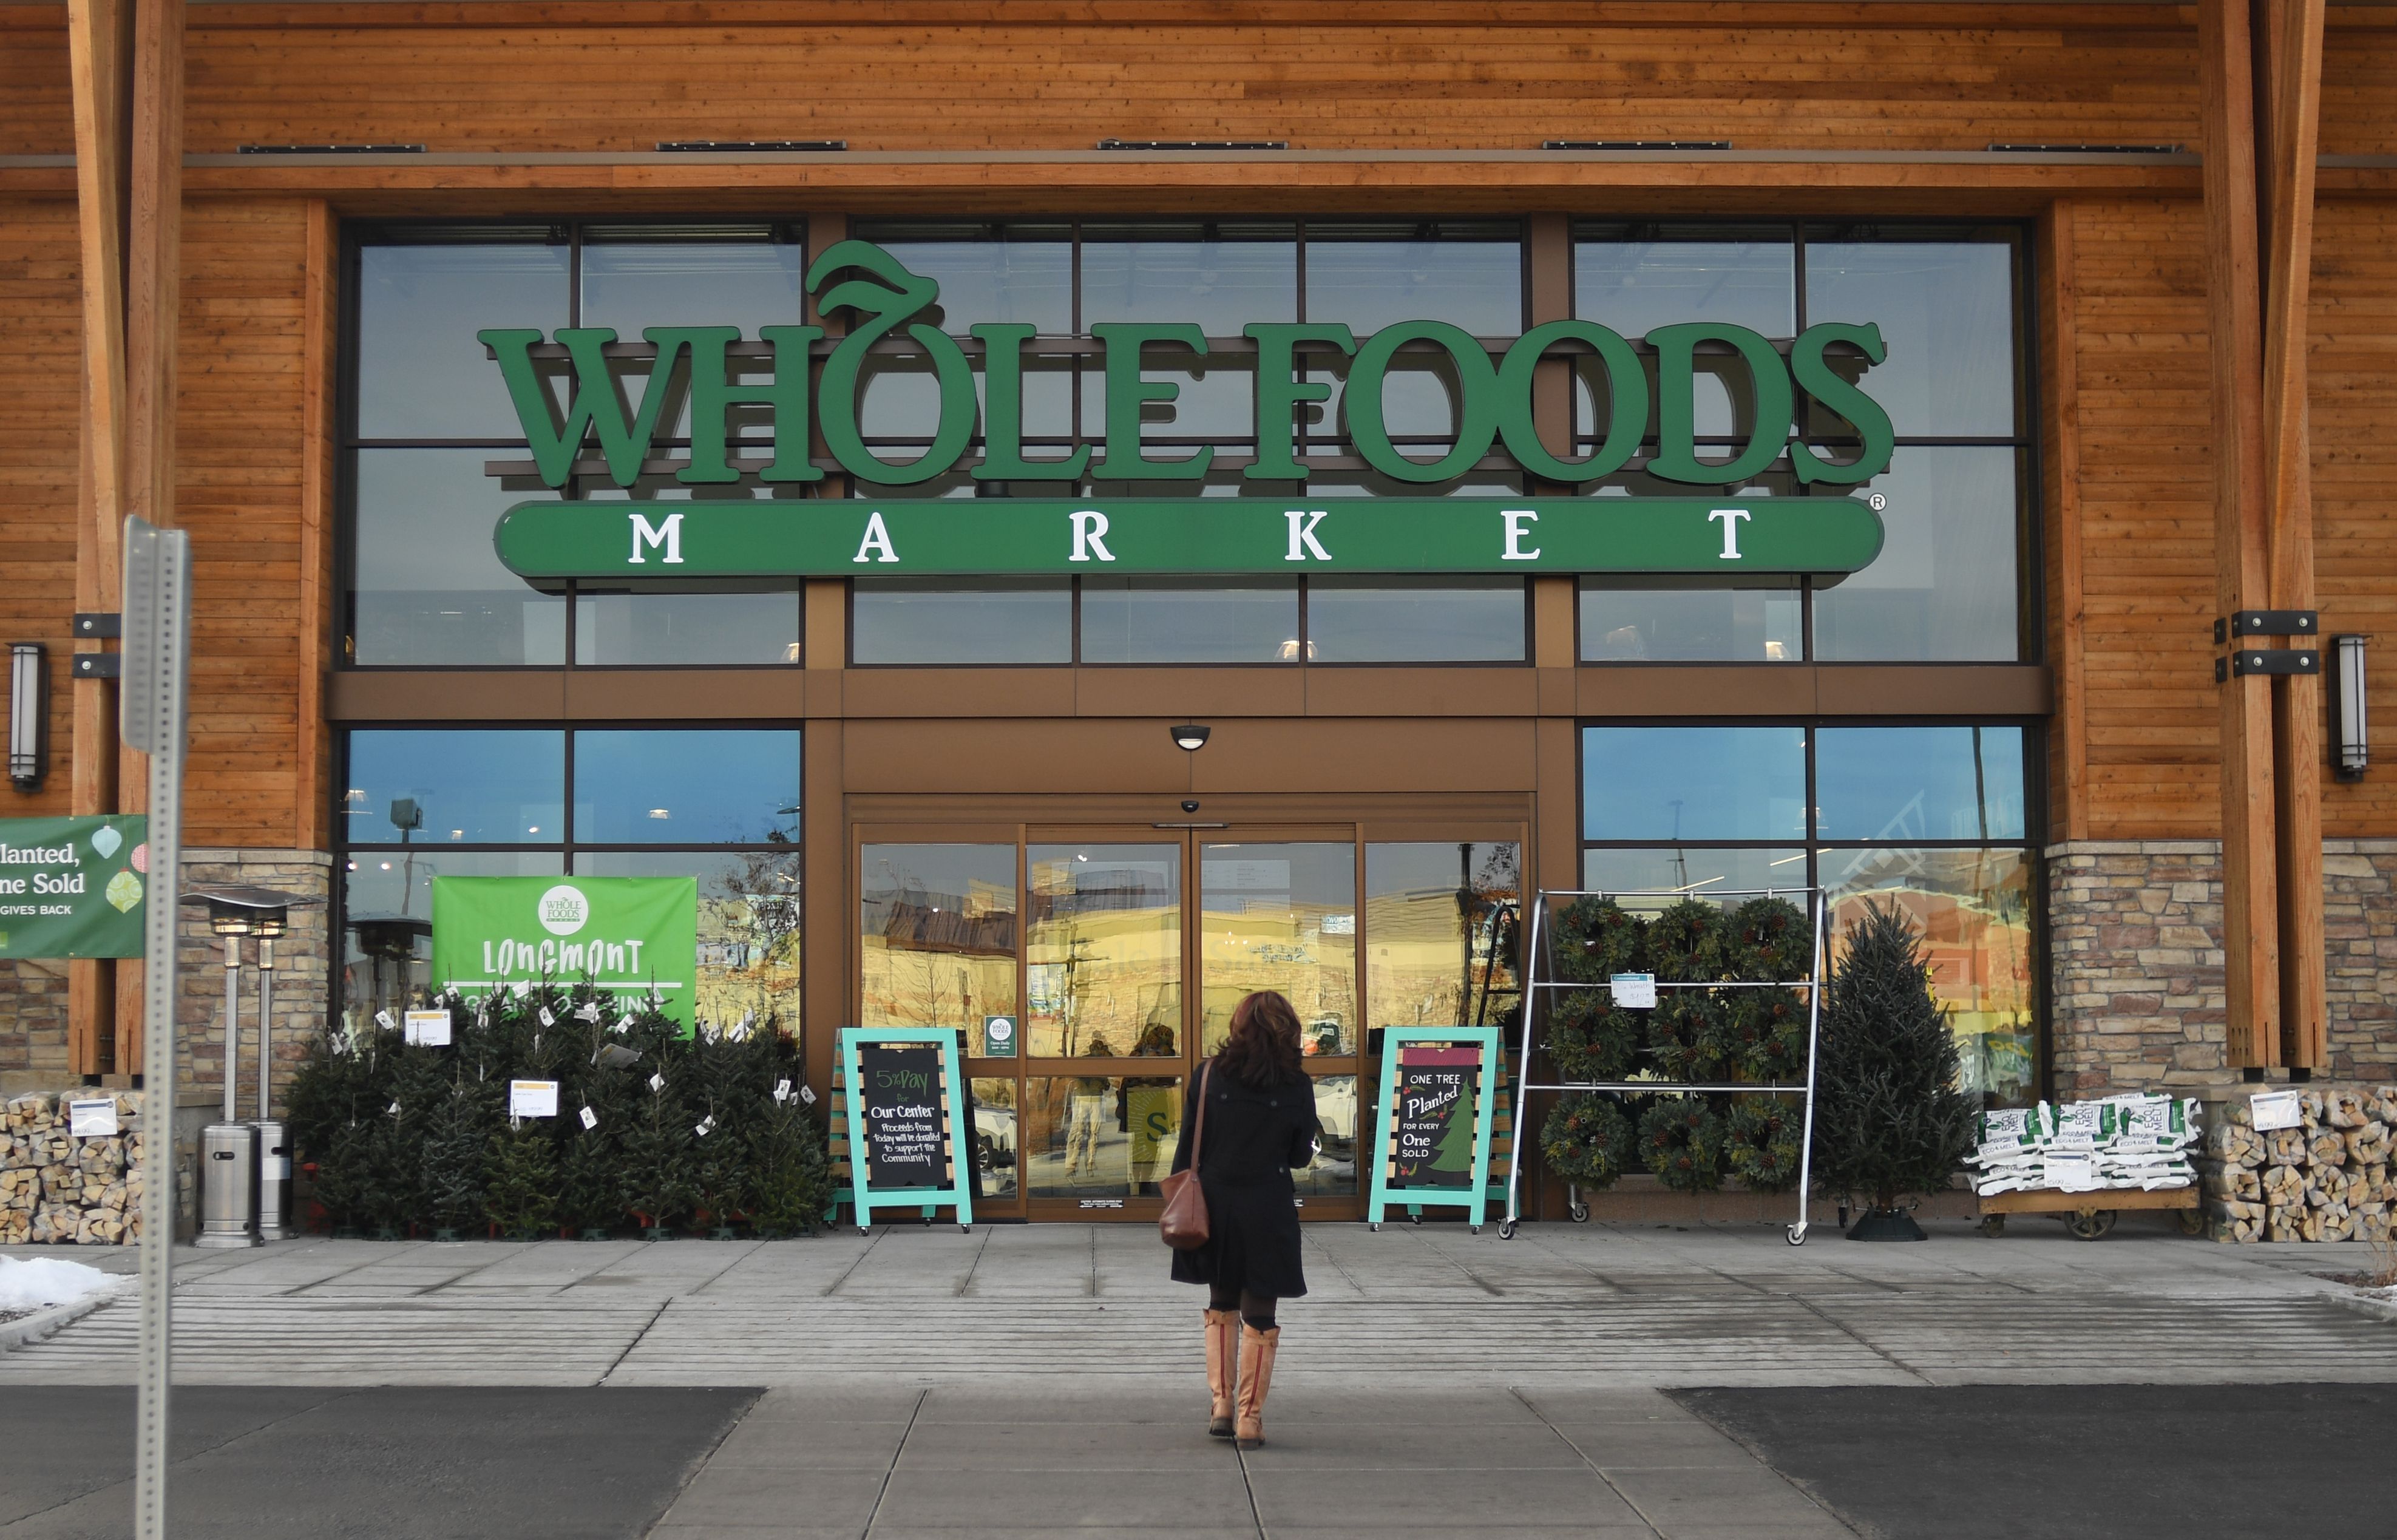 tacks on fee for Prime members who shop at Whole Foods